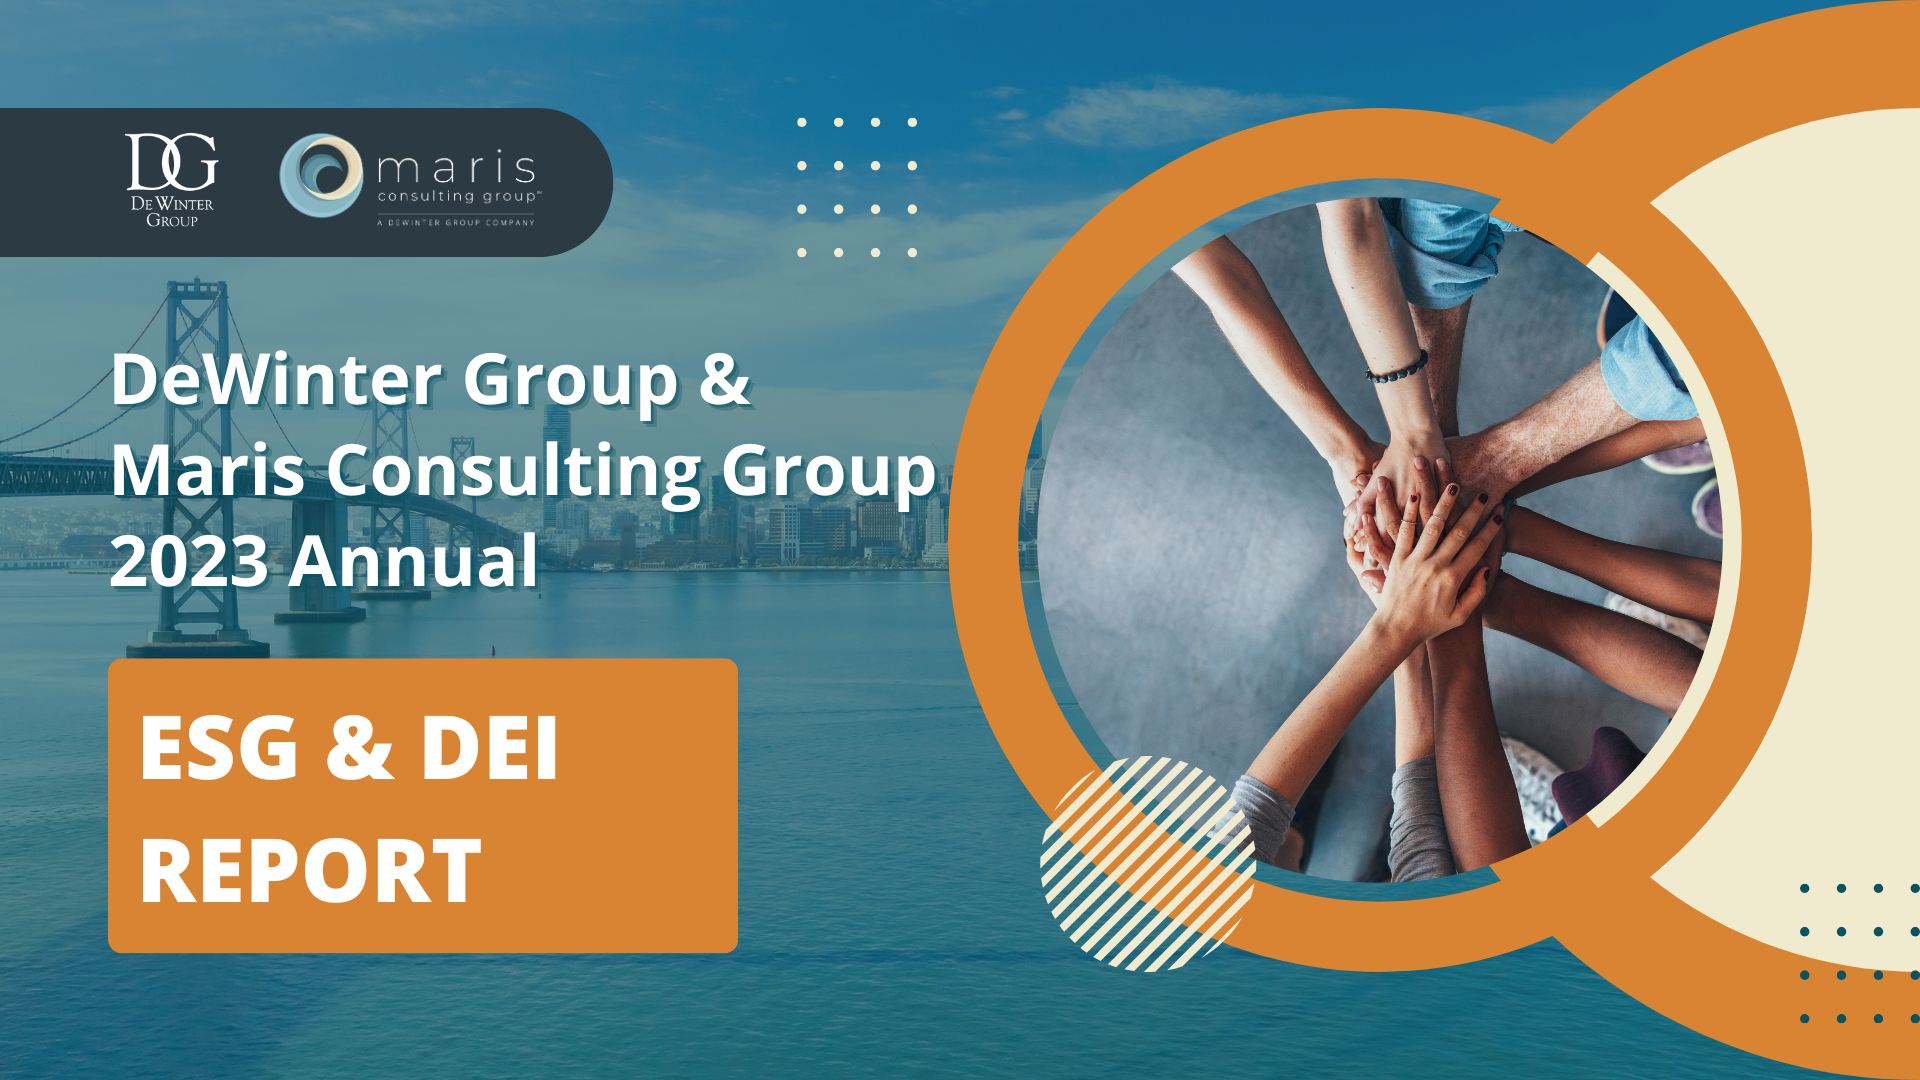 The 2023 DeWinter Group and Maris Consulting Group Annual ESG & DEI Report